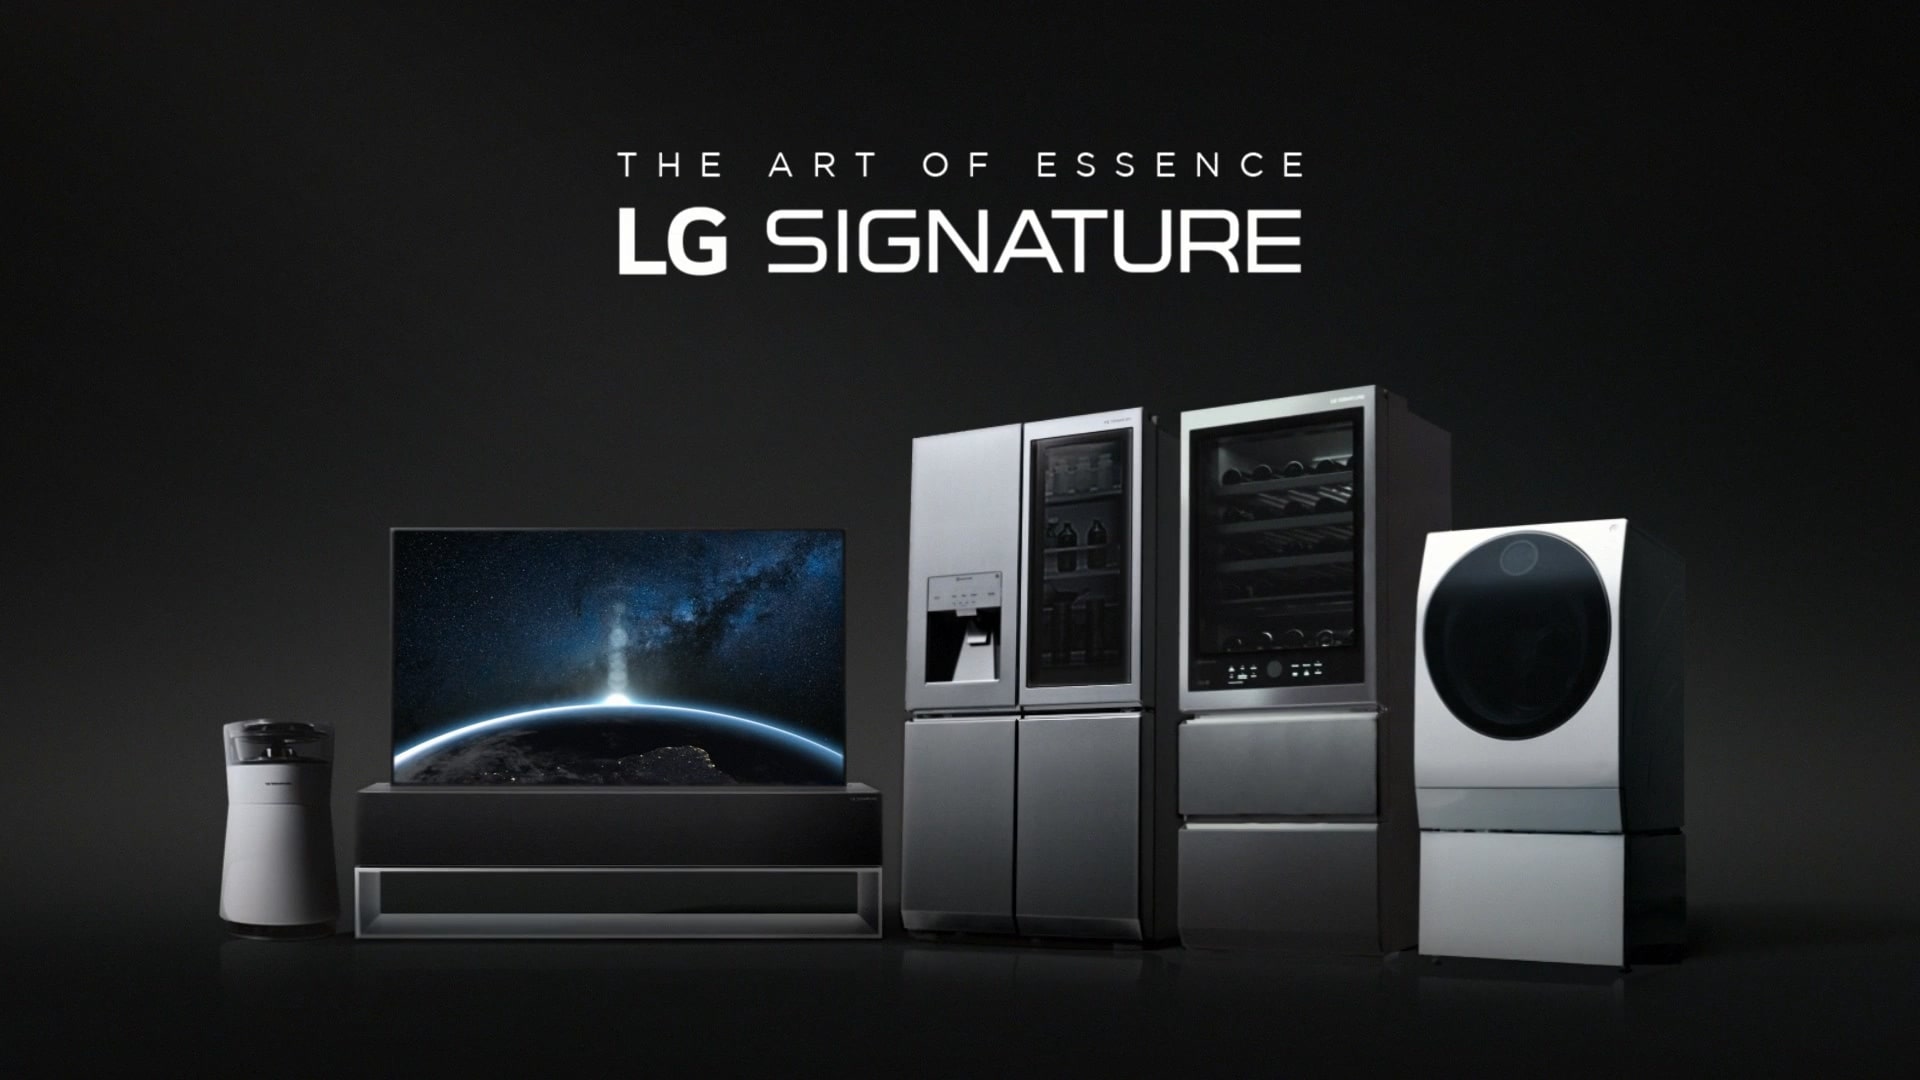 A short video showcasing LG SIGNATURE's grandeur, craftmanship and innovation. (play the video)